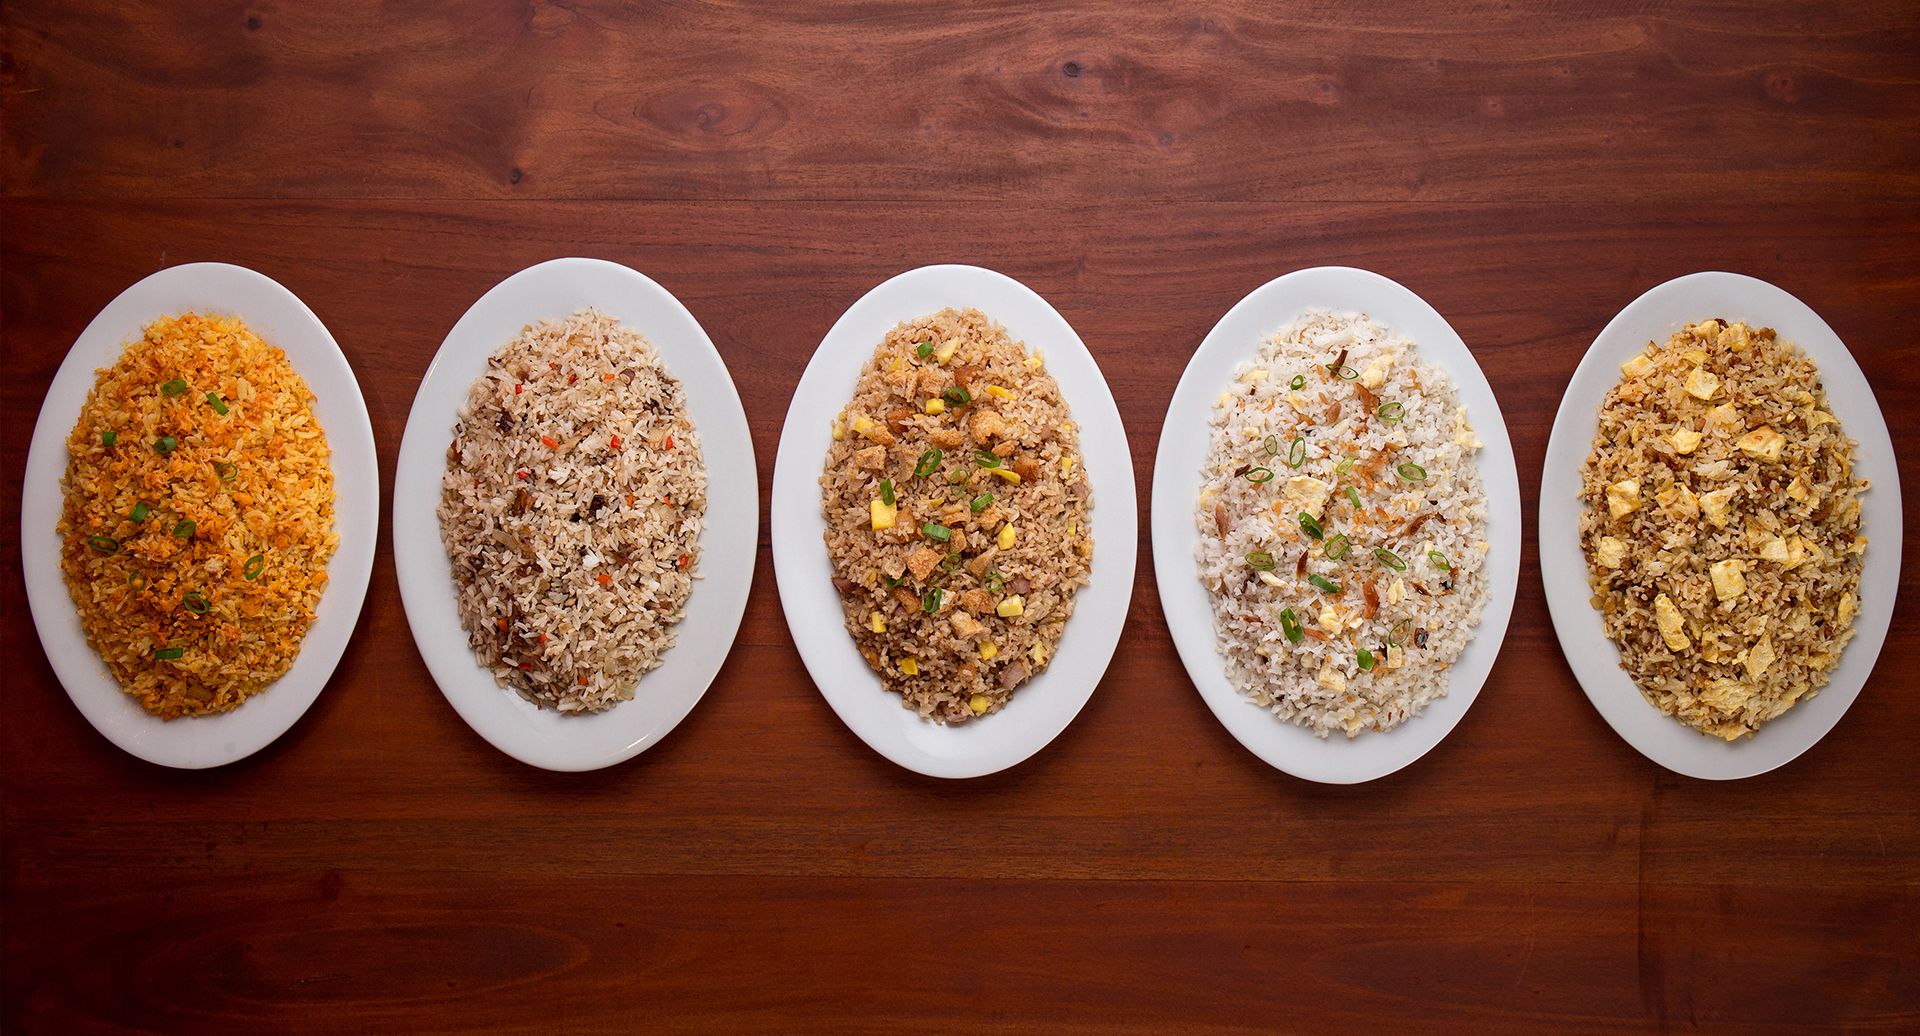 Fried Rice Selection